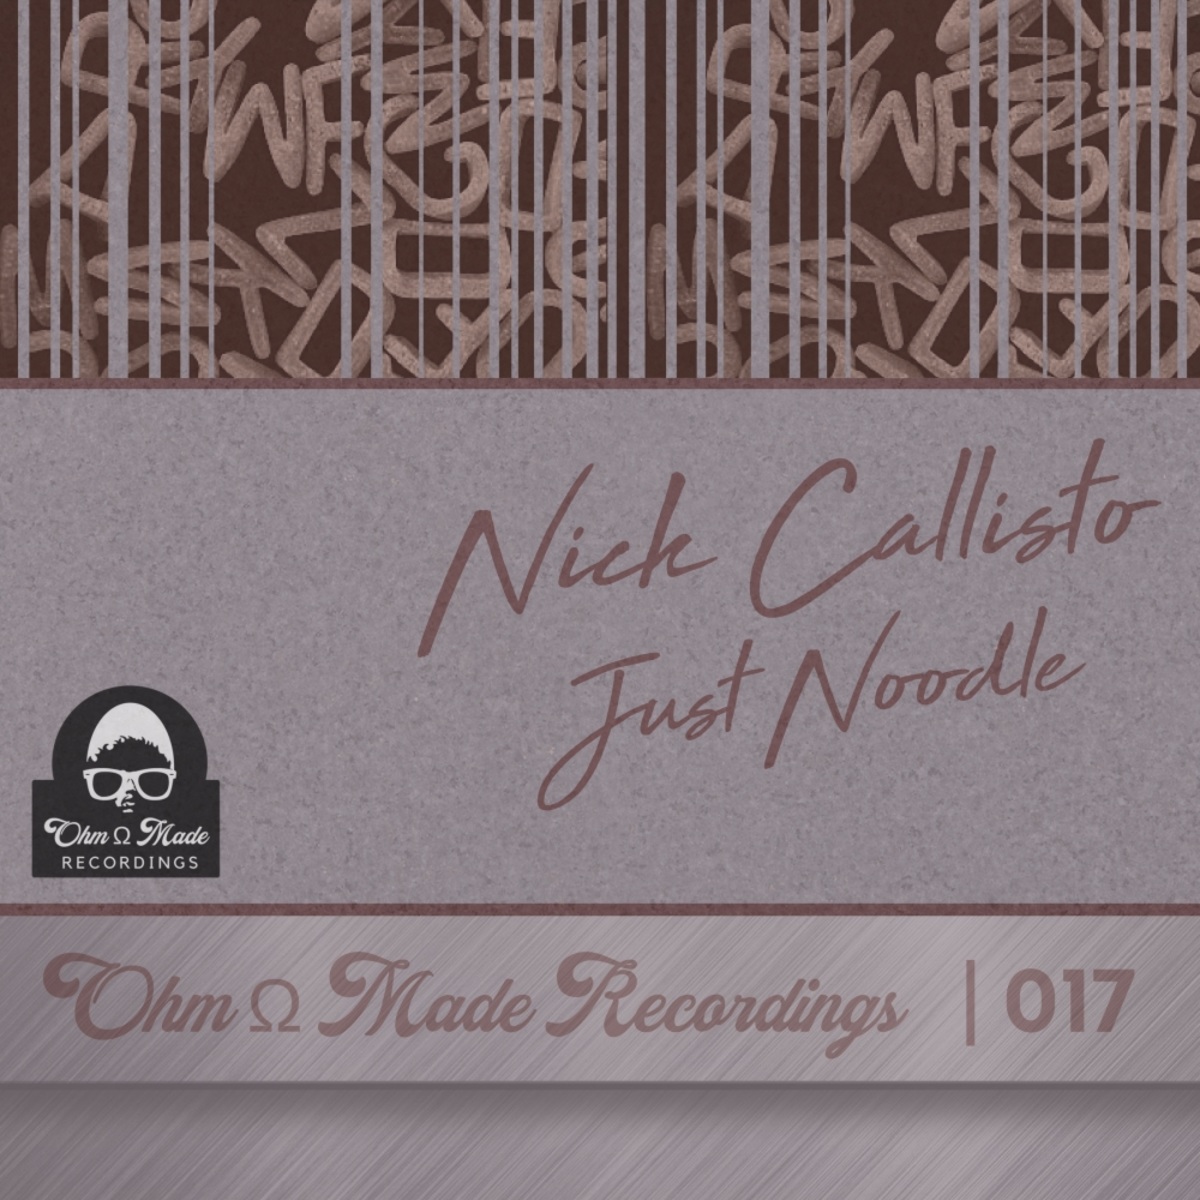 Nick Callisto - Just Noodle / Ohm Made Recordings